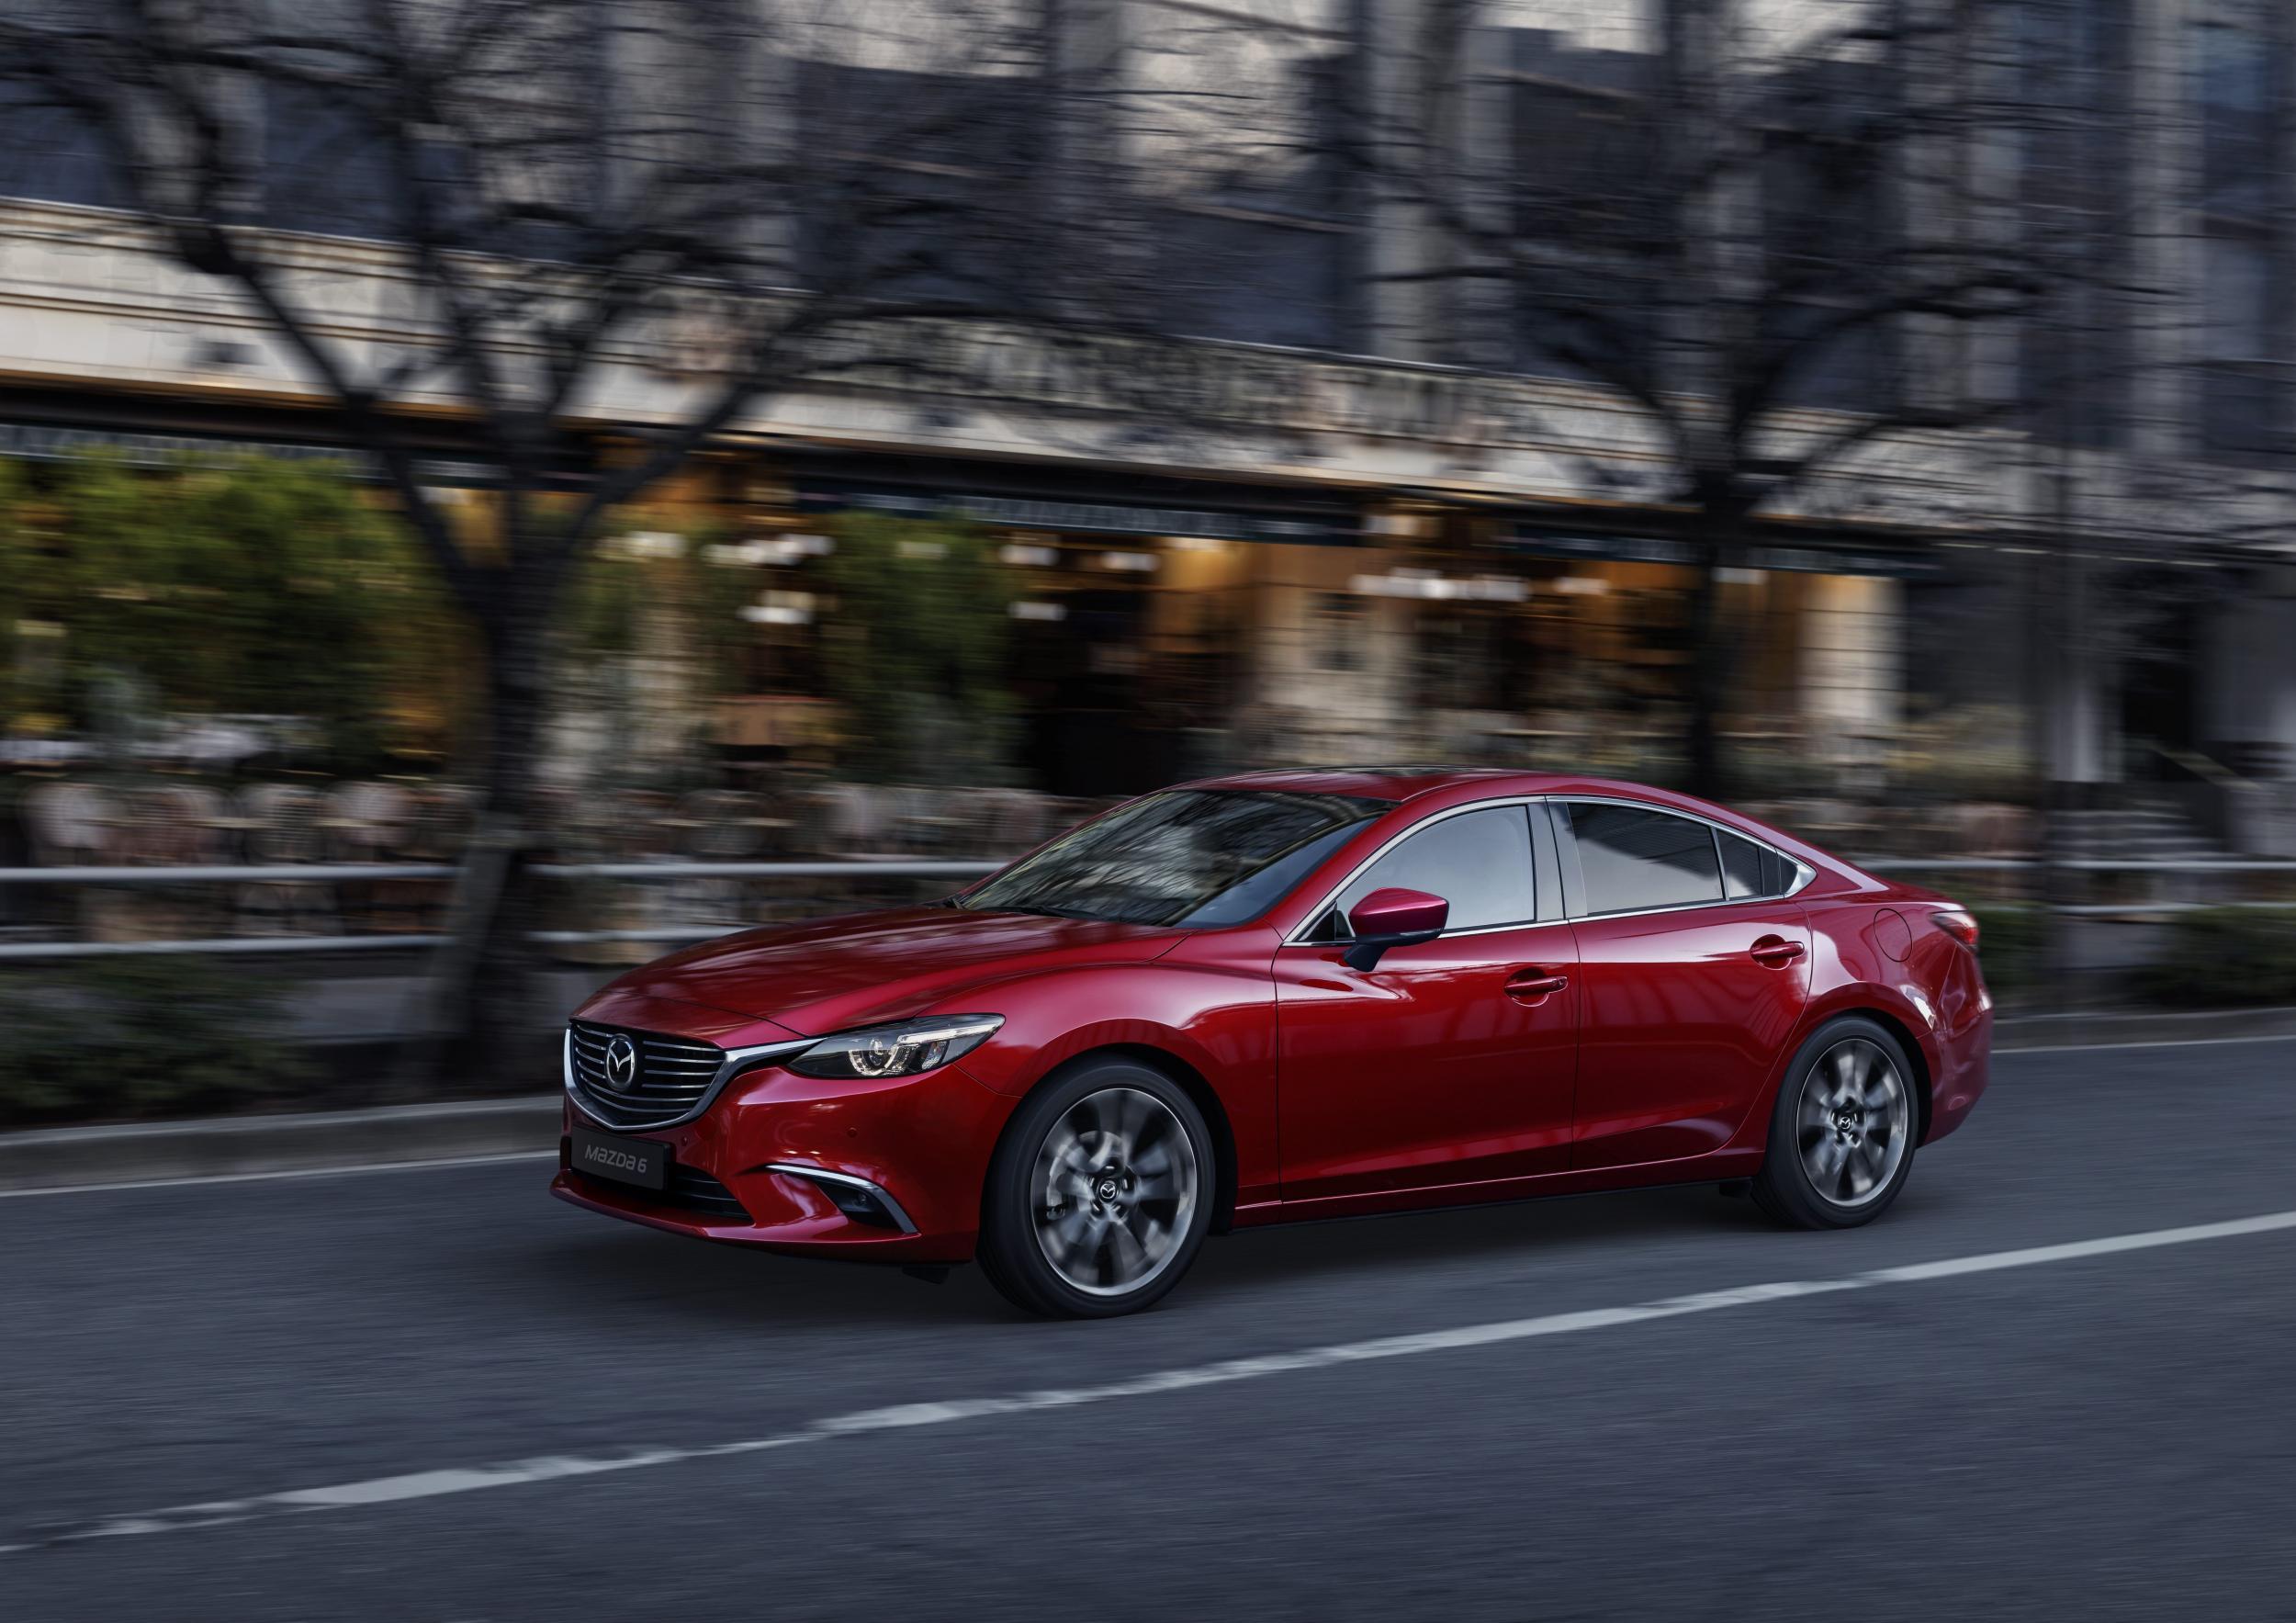 Like good and bad manners, good styling costs no more than bad styling, and the Mazda 6 demonstrates how a small player can carve out a niche for itself